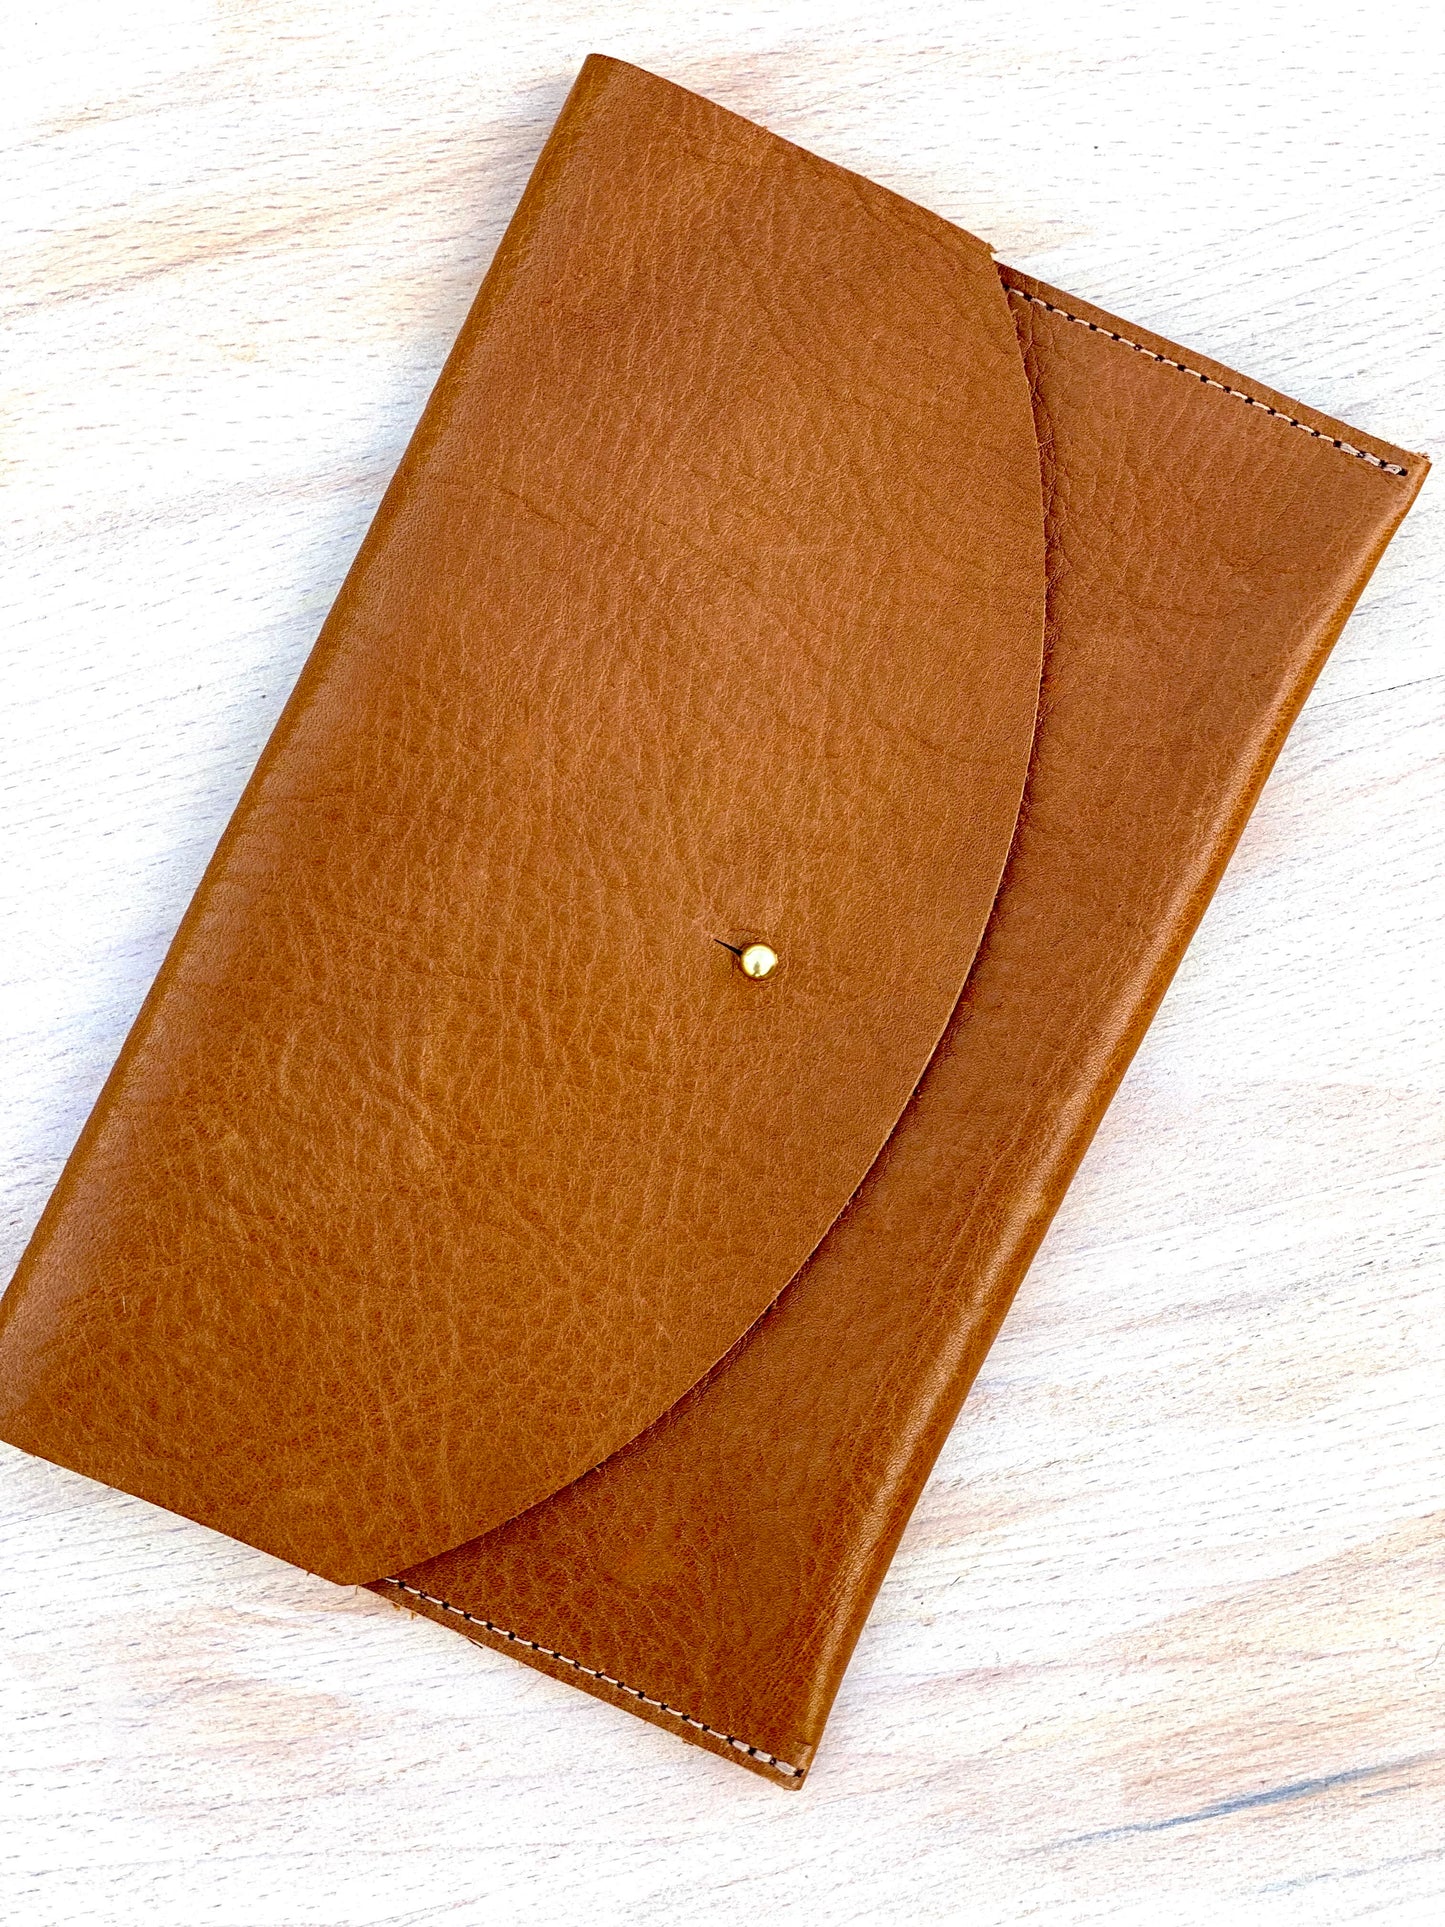 Leather Envelope Pouch by Lizzie of Primecut